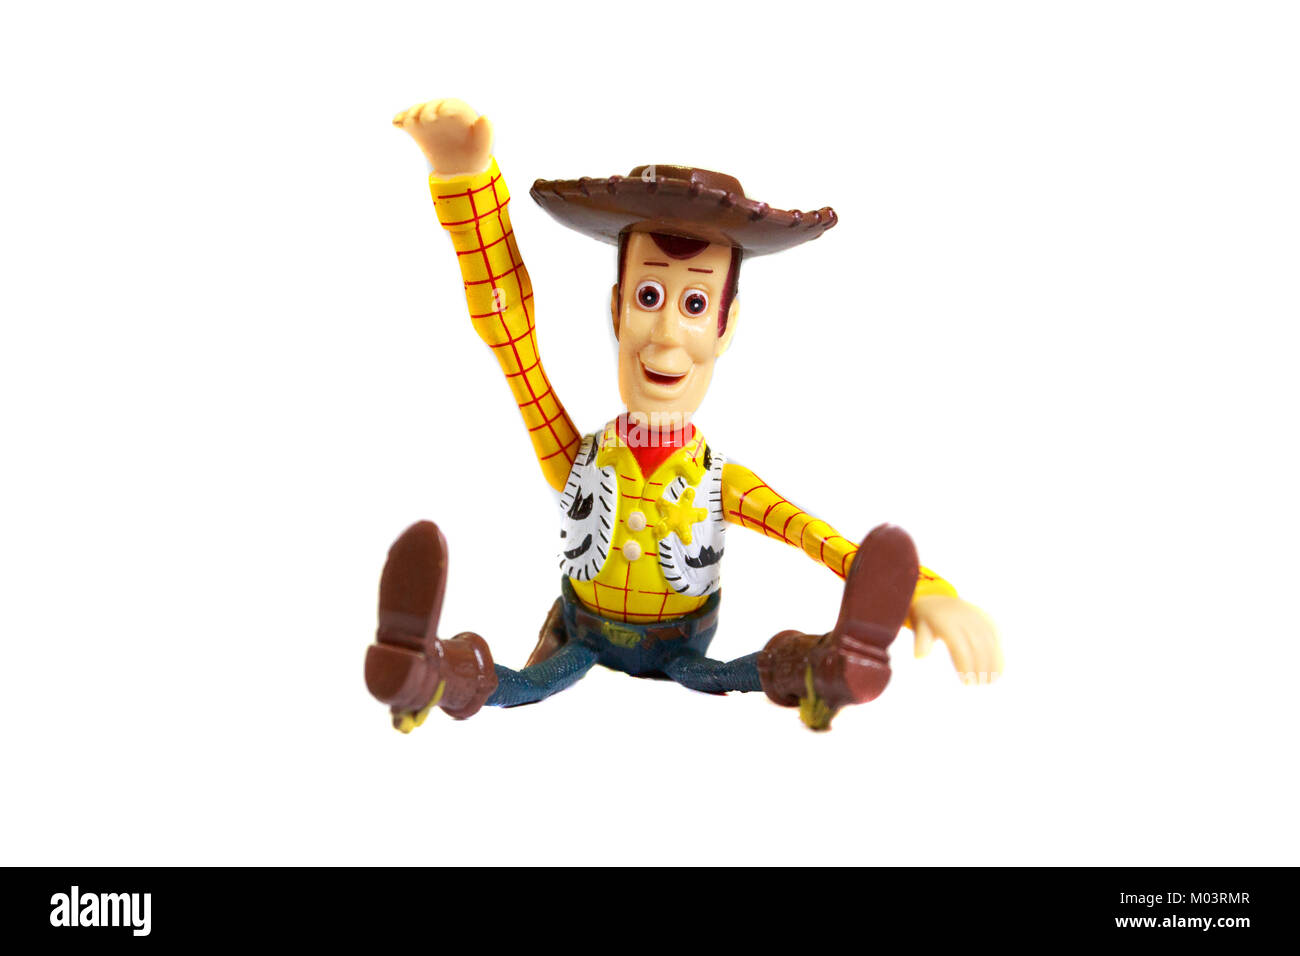 Studio Shot of Woody, a Disney Movie Character Extremely Popular Worldwide with Children. Stock Photo